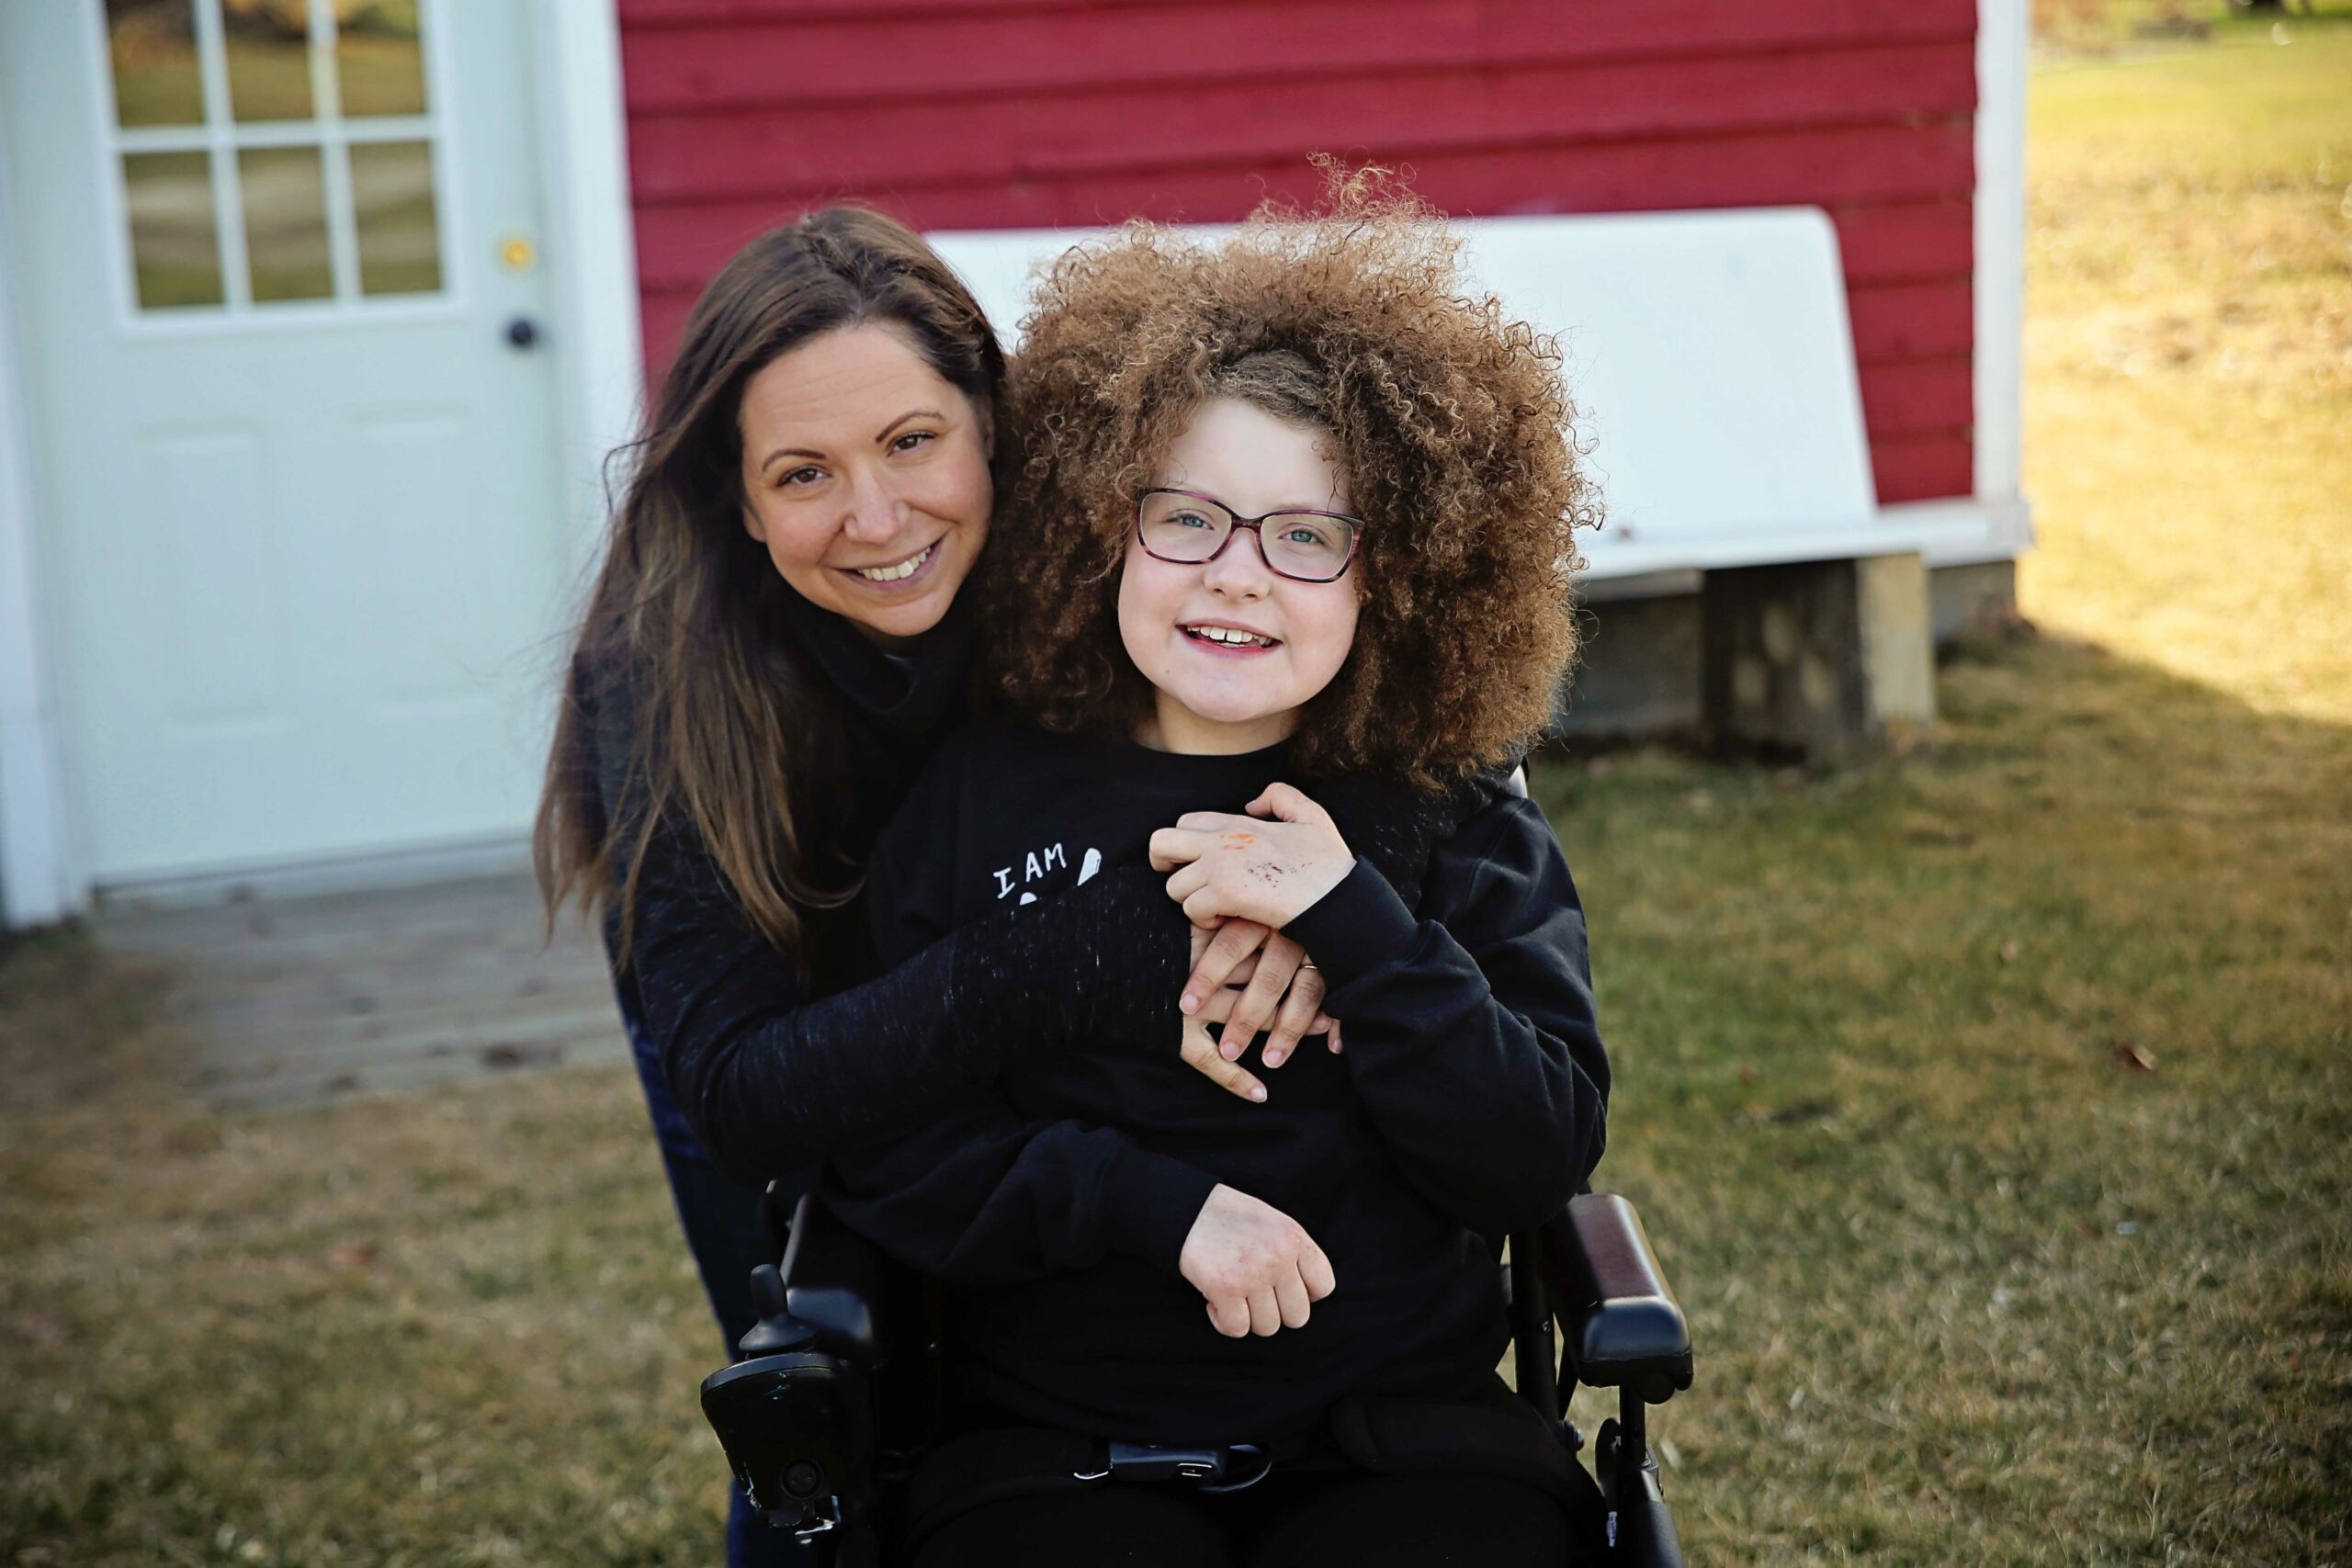 stollery kid jordan and her mom smiling outside on the grass